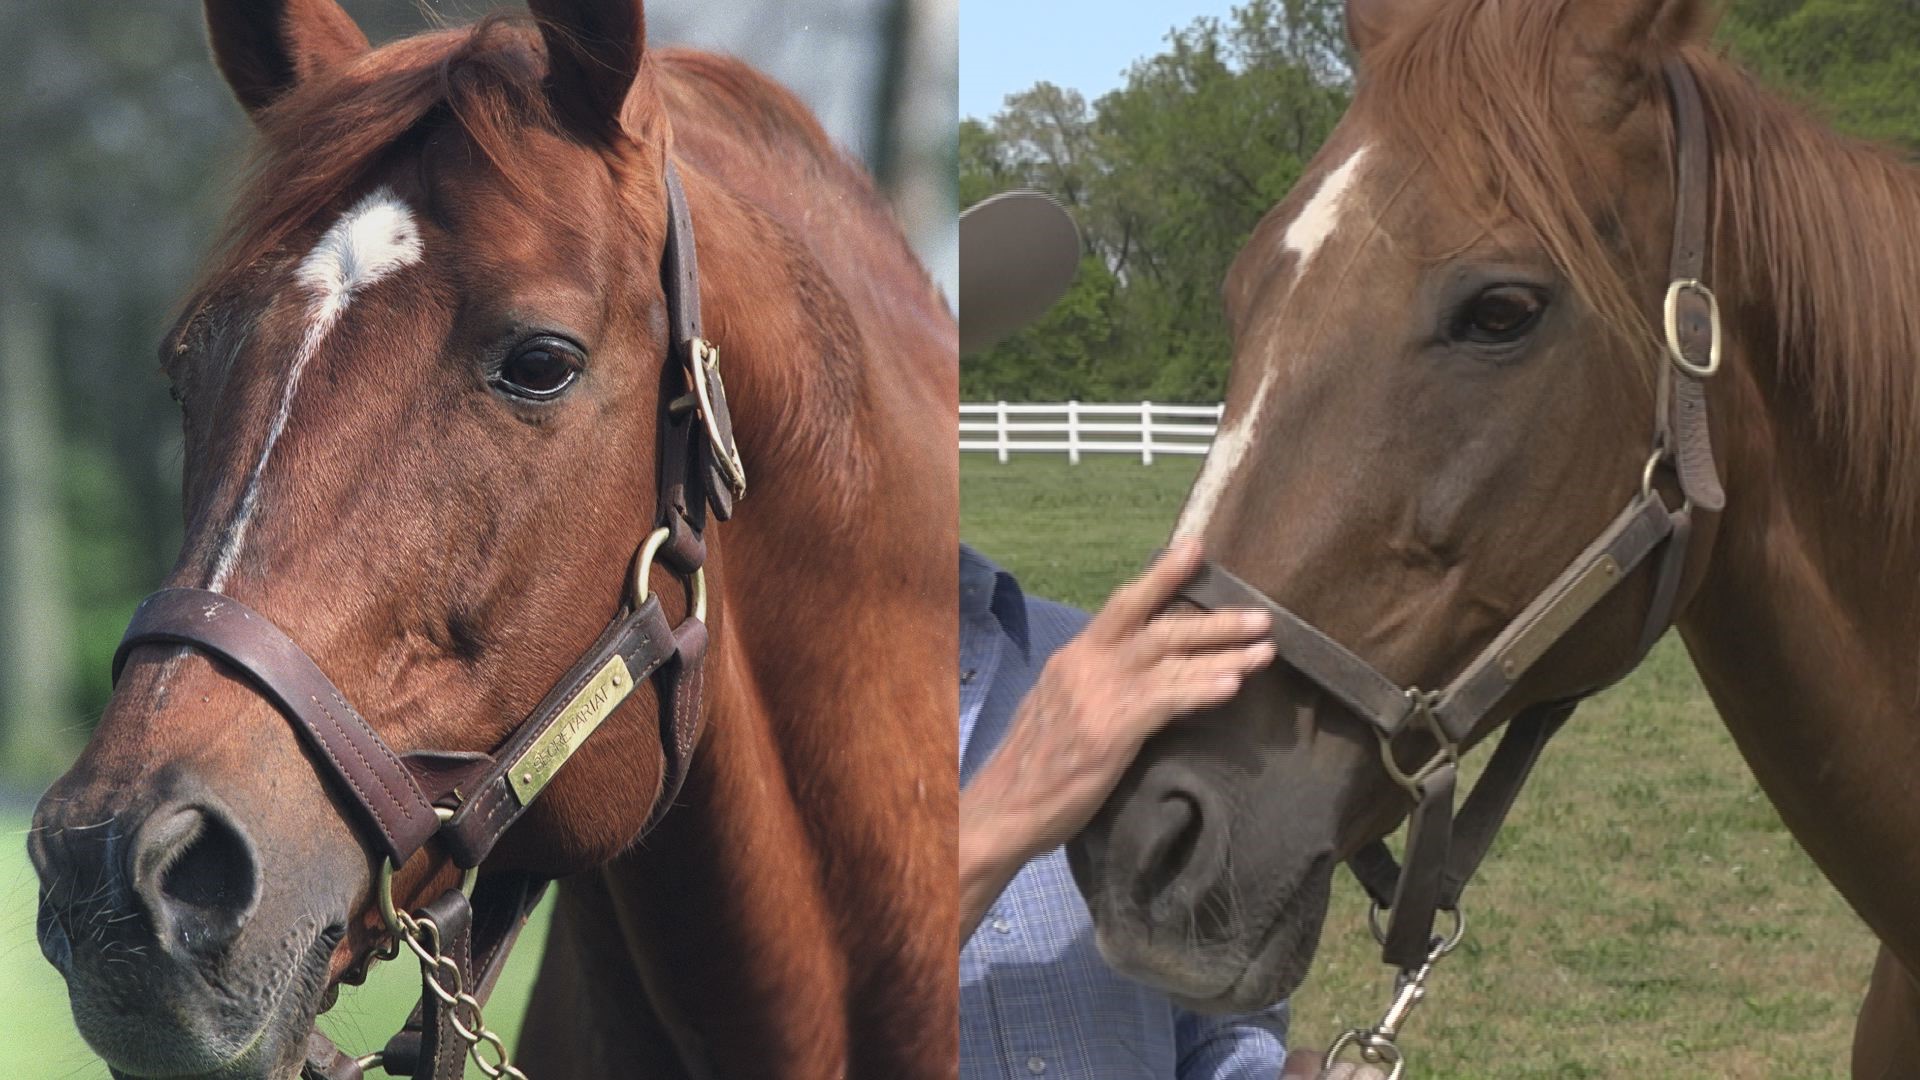 Five decades later, some of those Secretariat genes live on at a Metro East stable with history and dreams of its own.